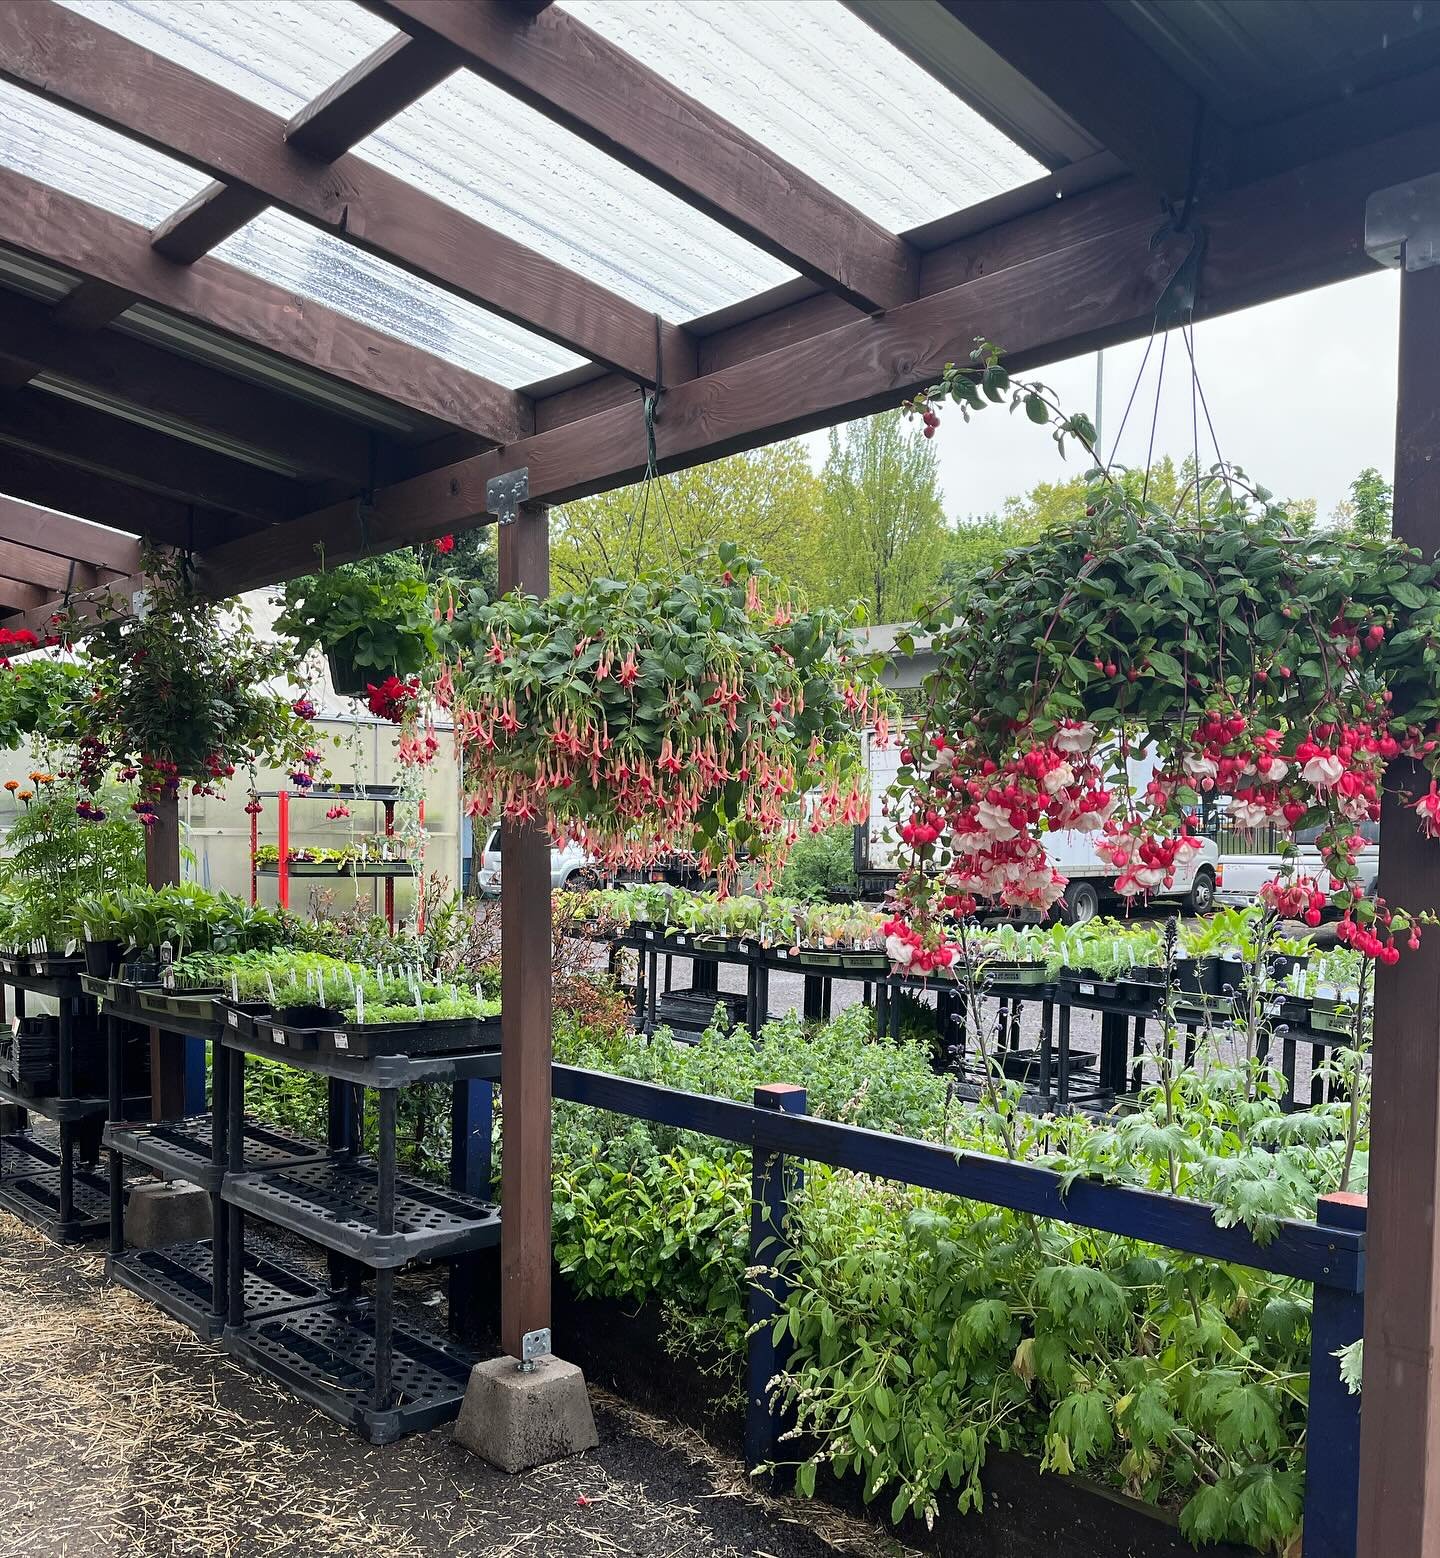 We&rsquo;ve got some really cool new hanging baskets and dye plants from @sunnysidesams ! Also, tomatoes, peppers, cucumbers, more in the greenhouse waiting for the good weather coming next week.